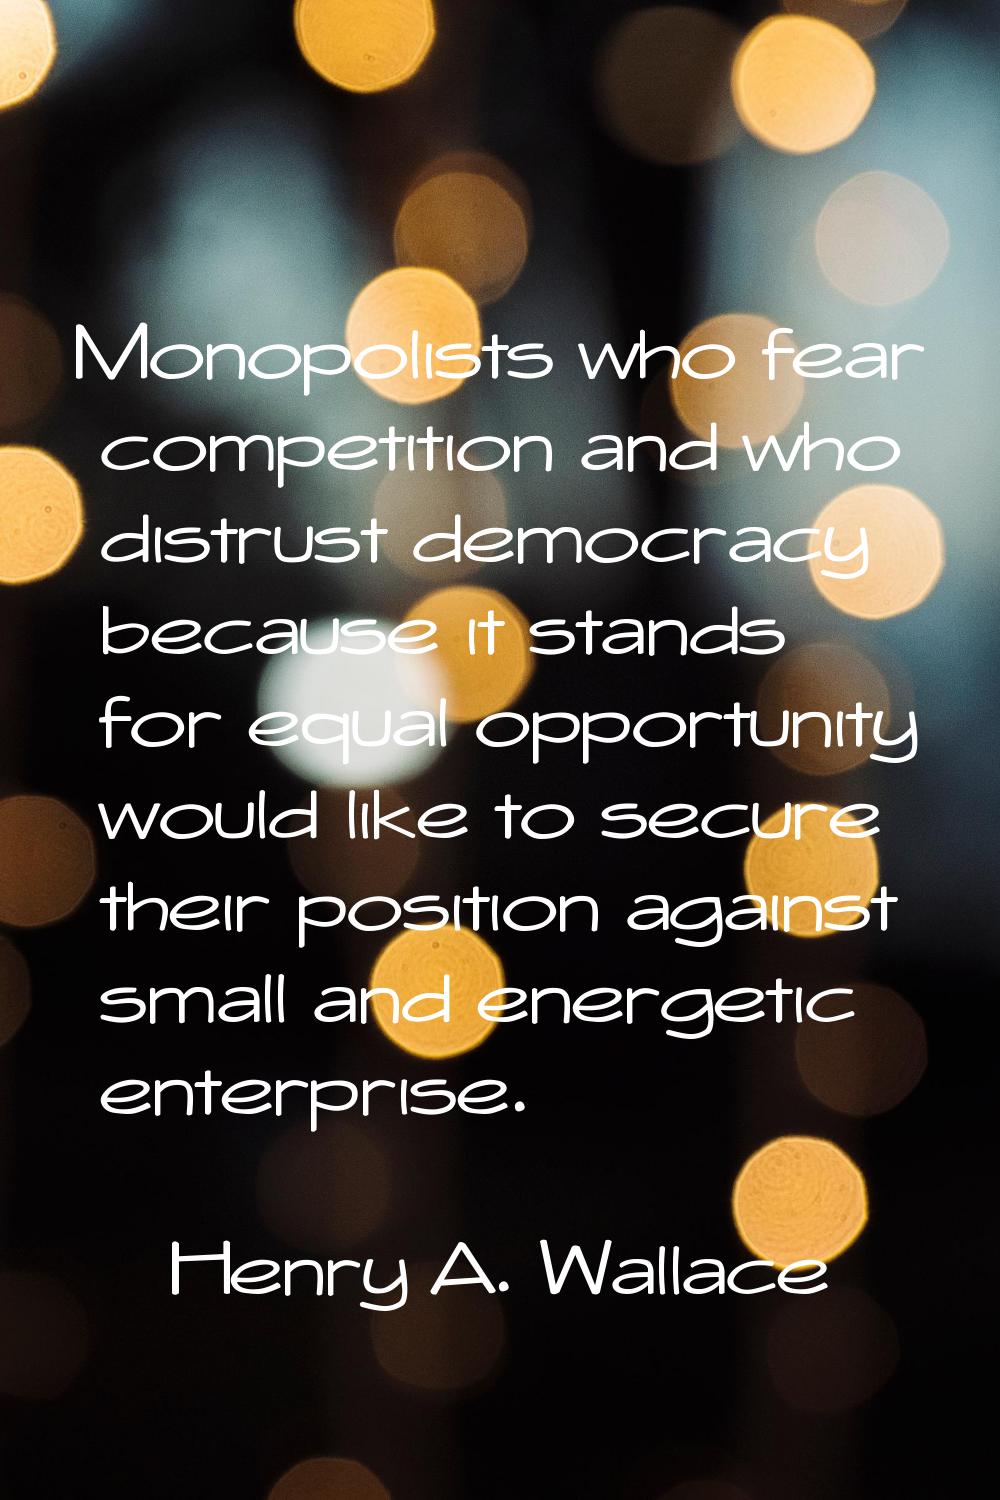 Monopolists who fear competition and who distrust democracy because it stands for equal opportunity